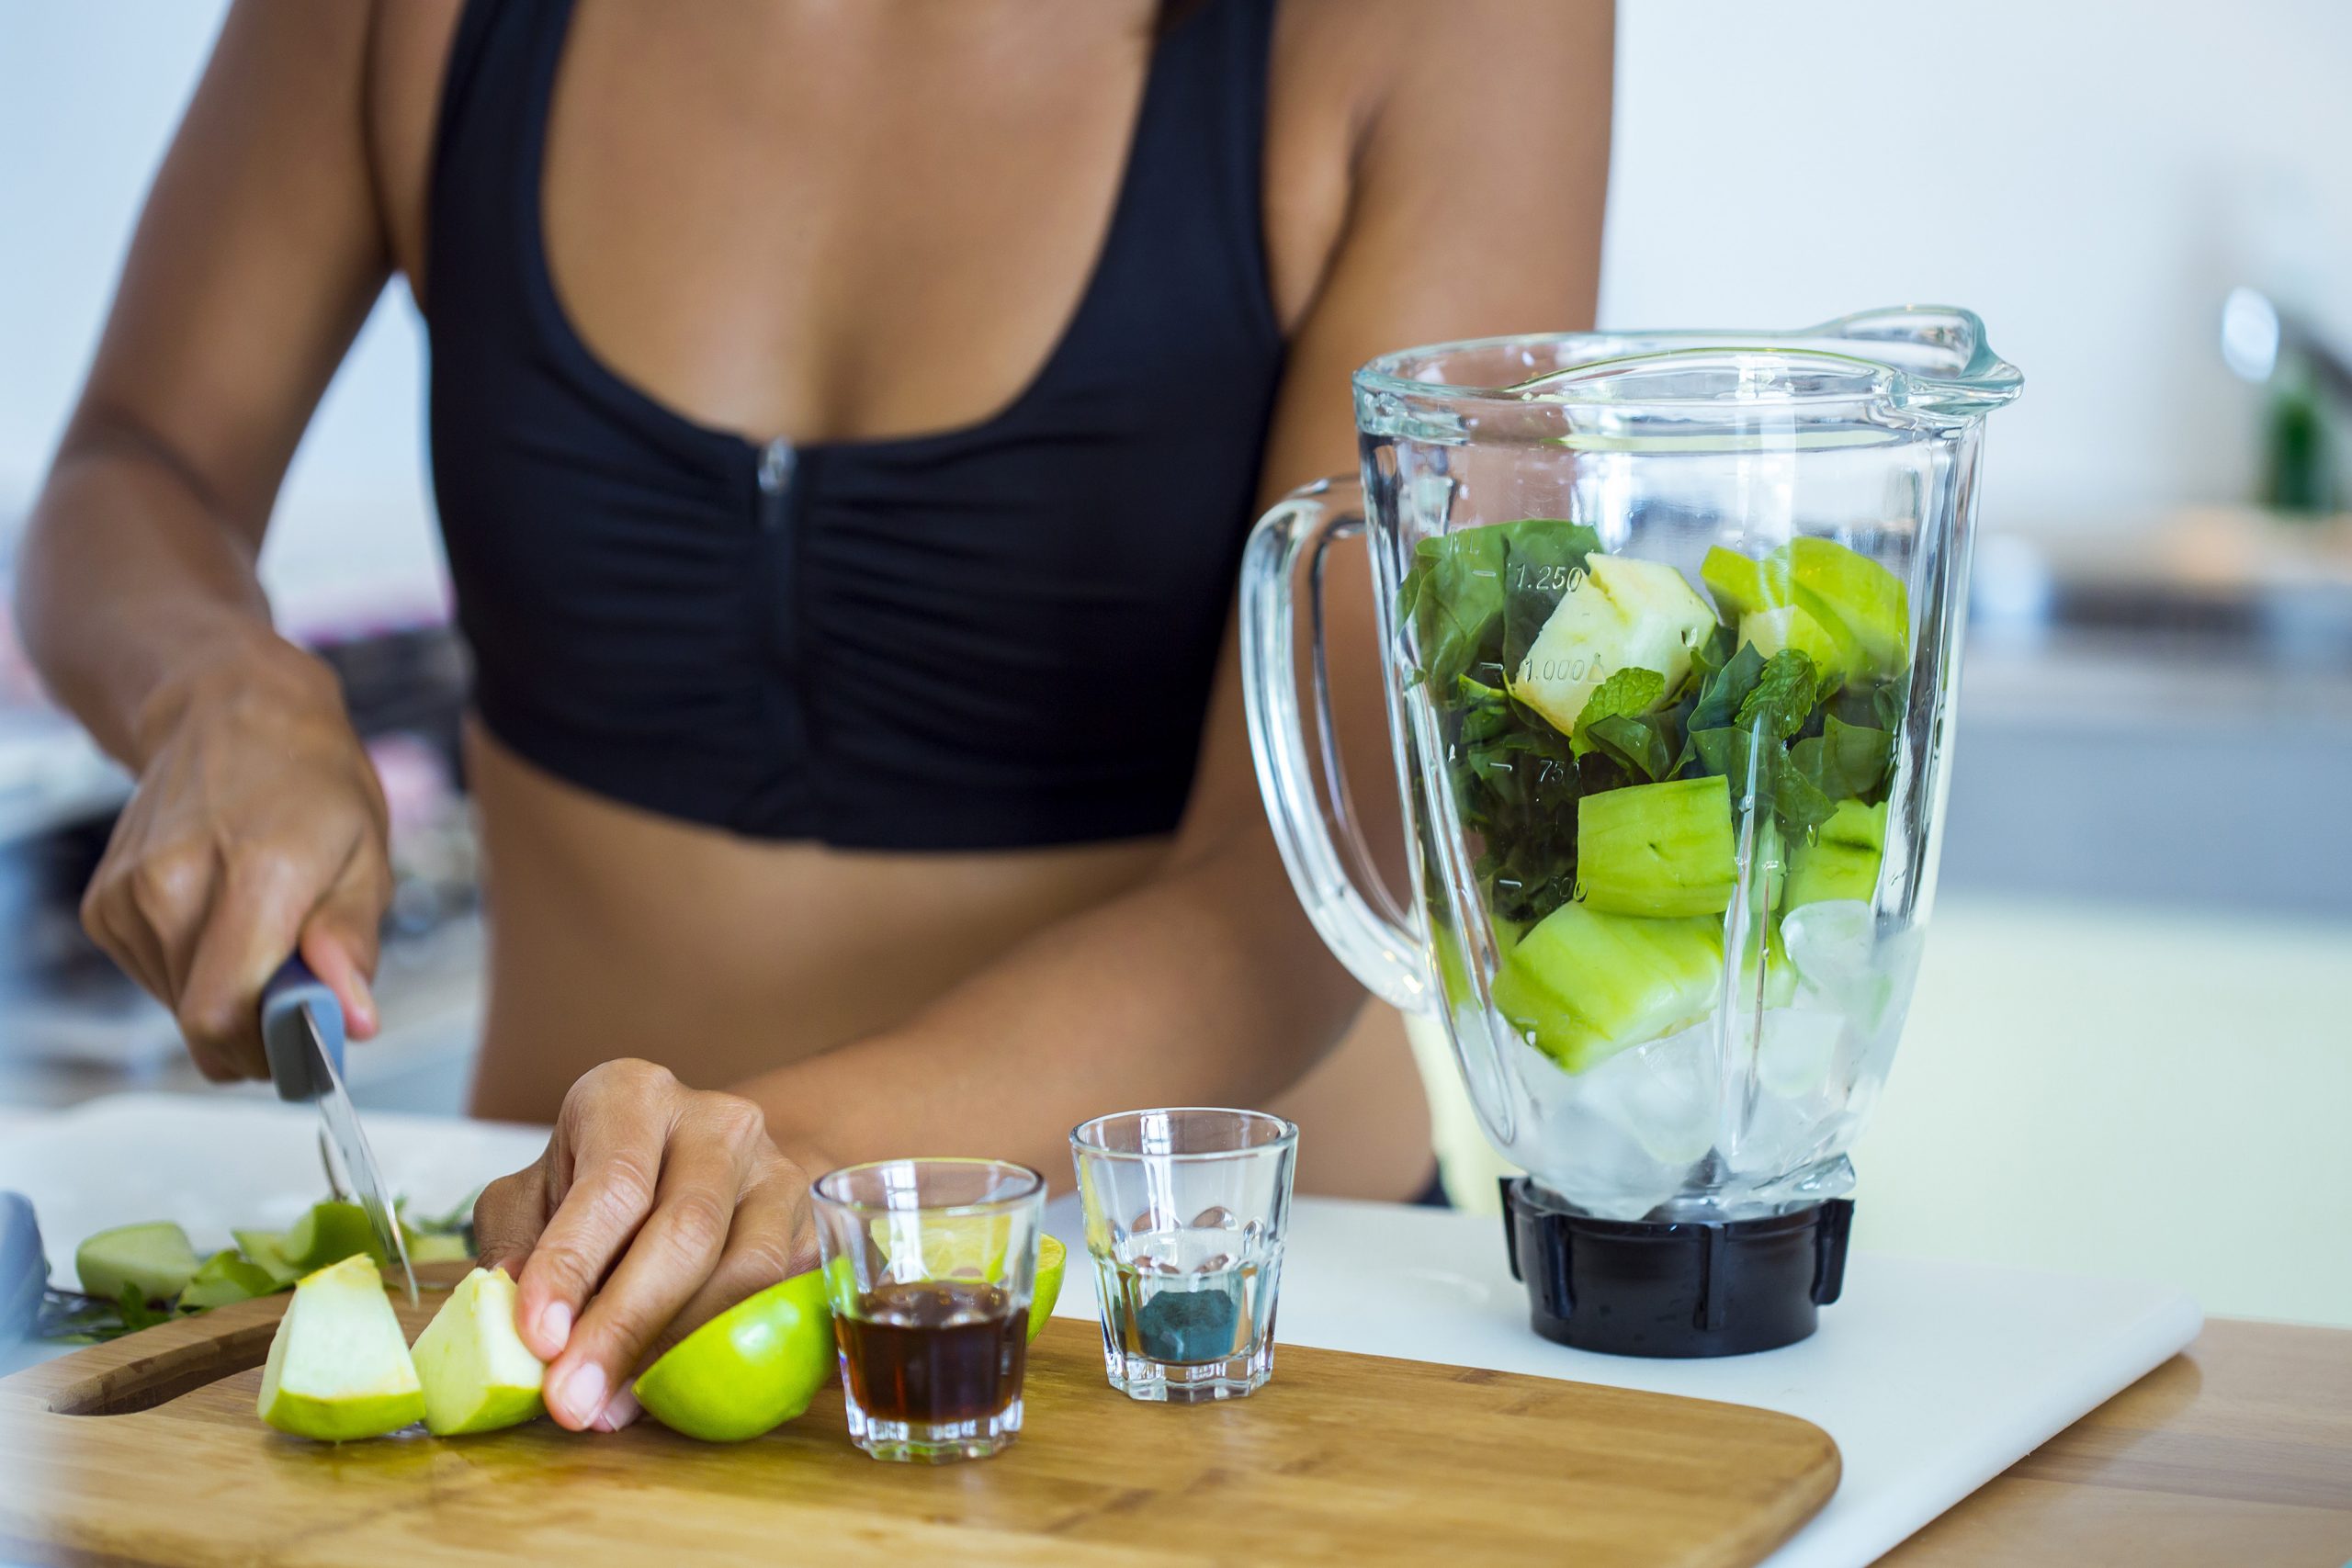 How a Detoxification Can Affect Your Health